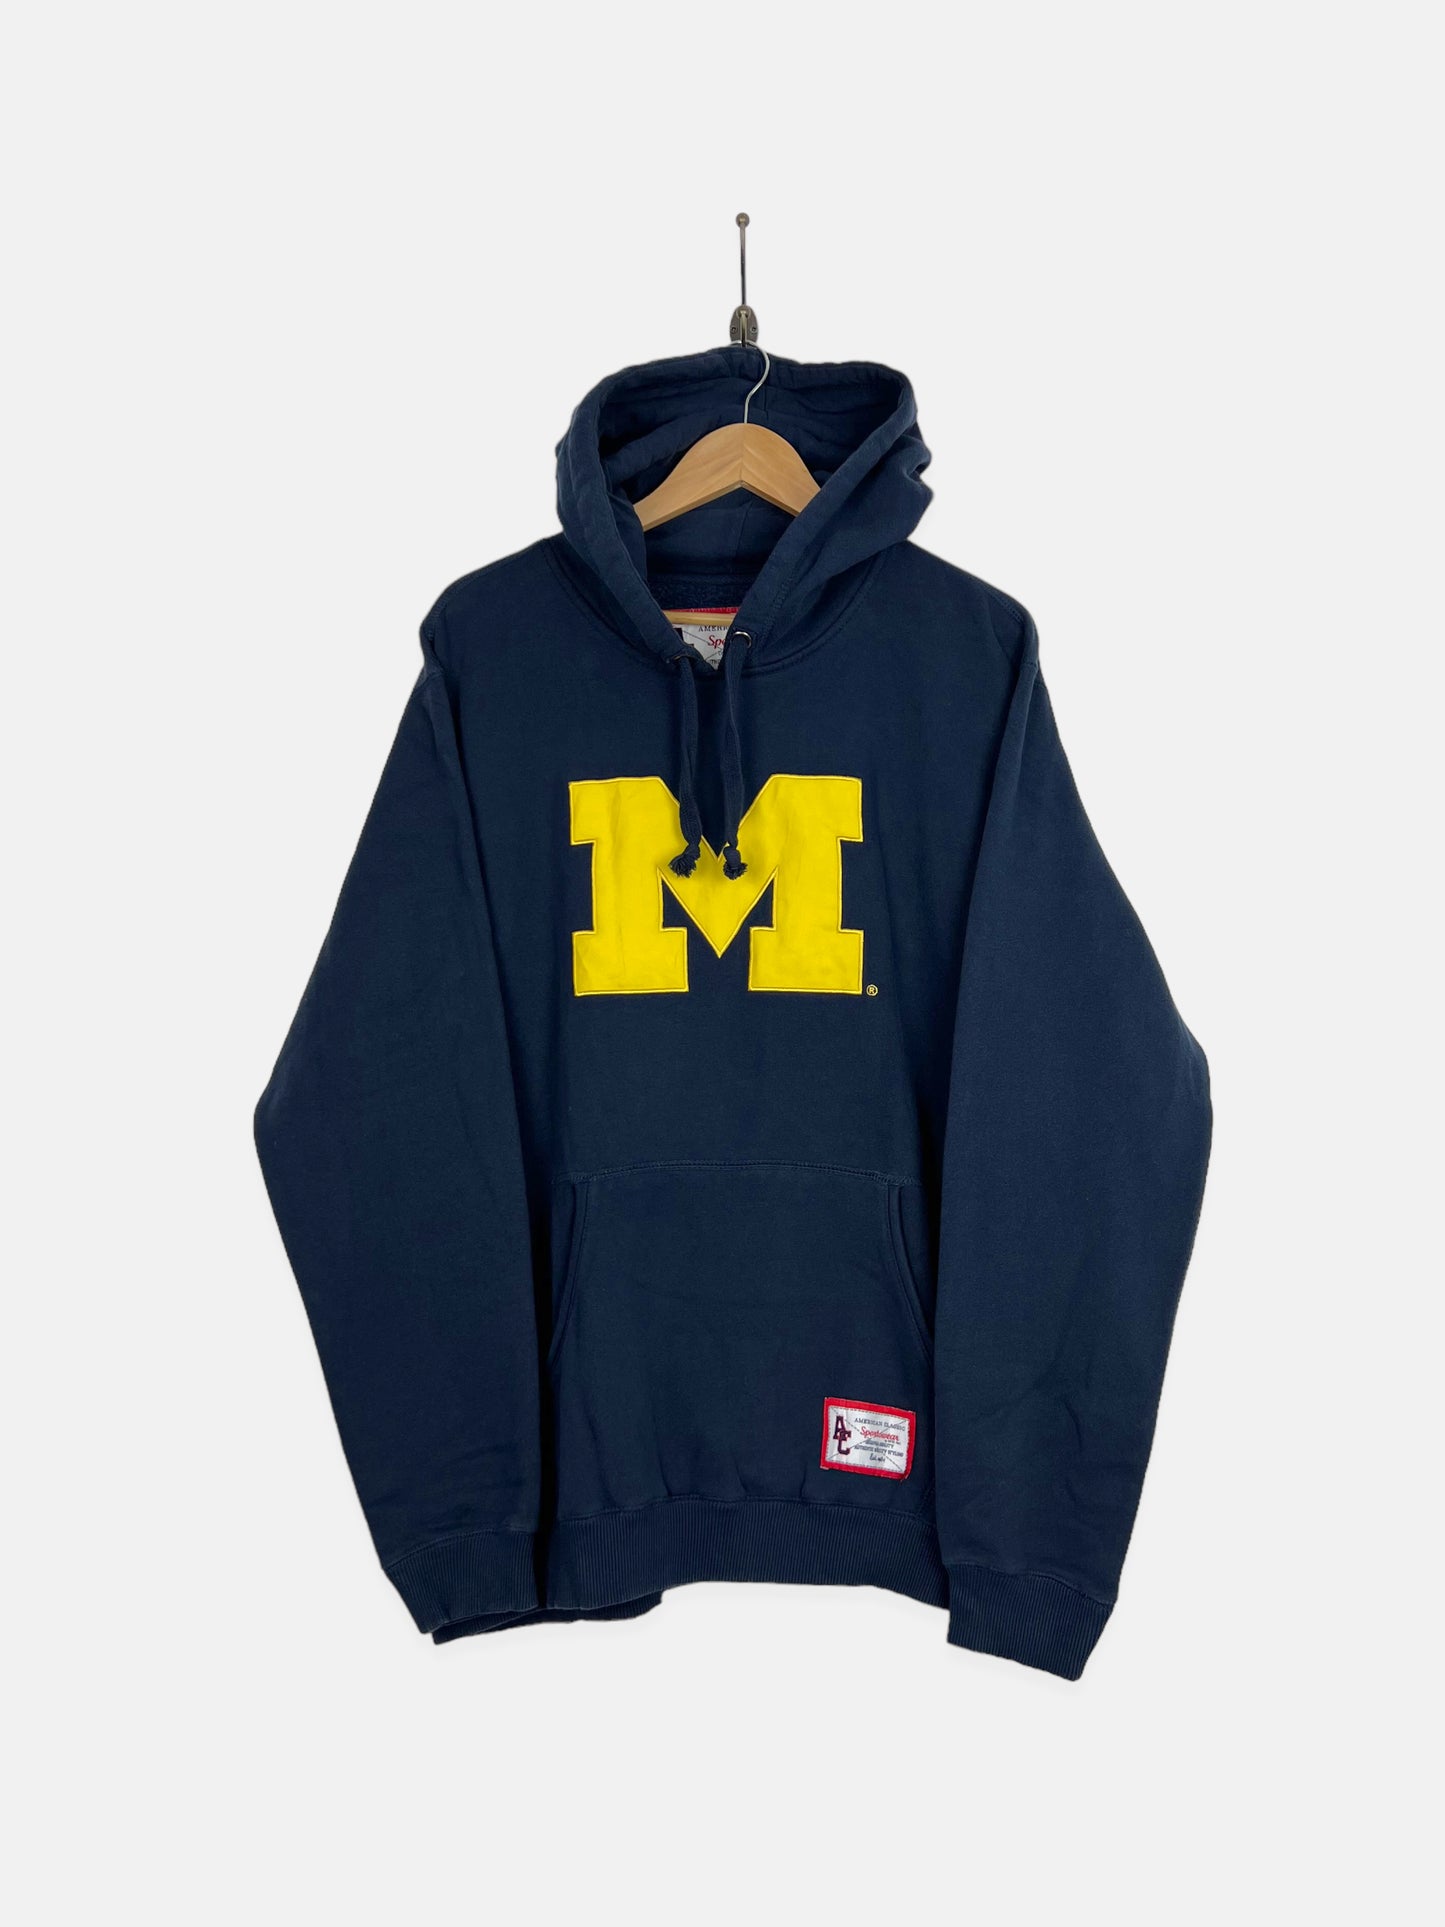 90's Michigan Embroidered Vintage Hoodie Size XL-2XL